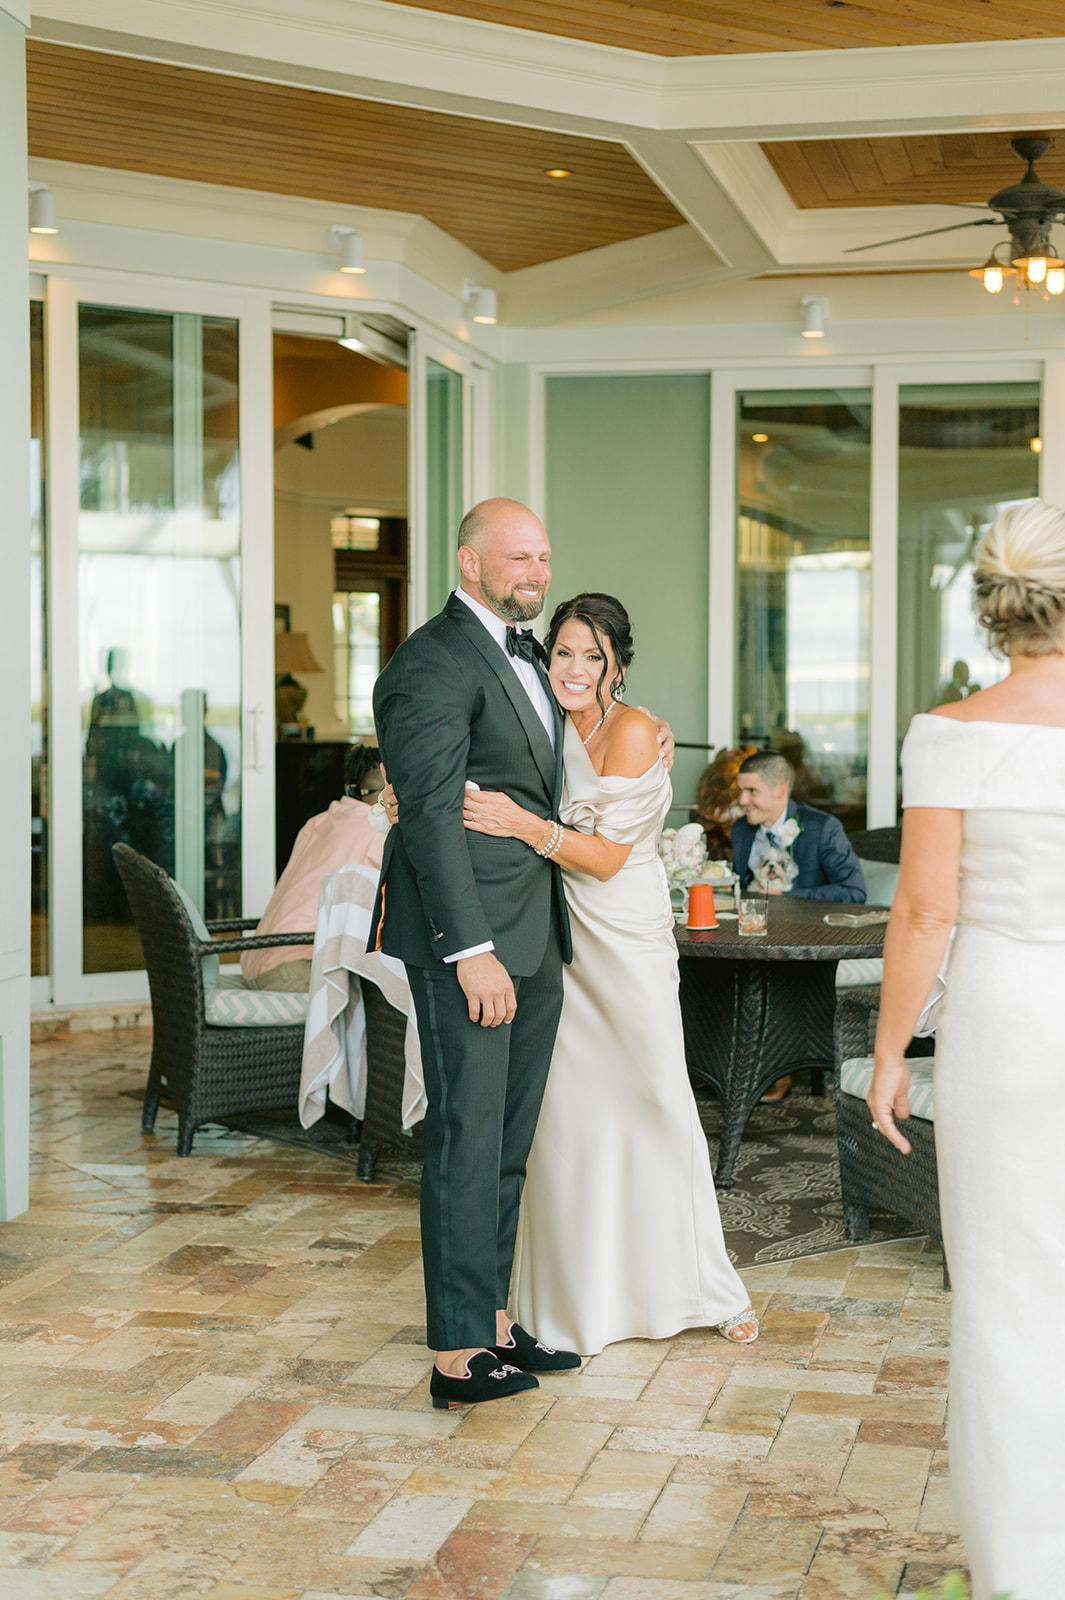 Marco Island Beach Wedding Photography with a Pro - Stunning Photos
